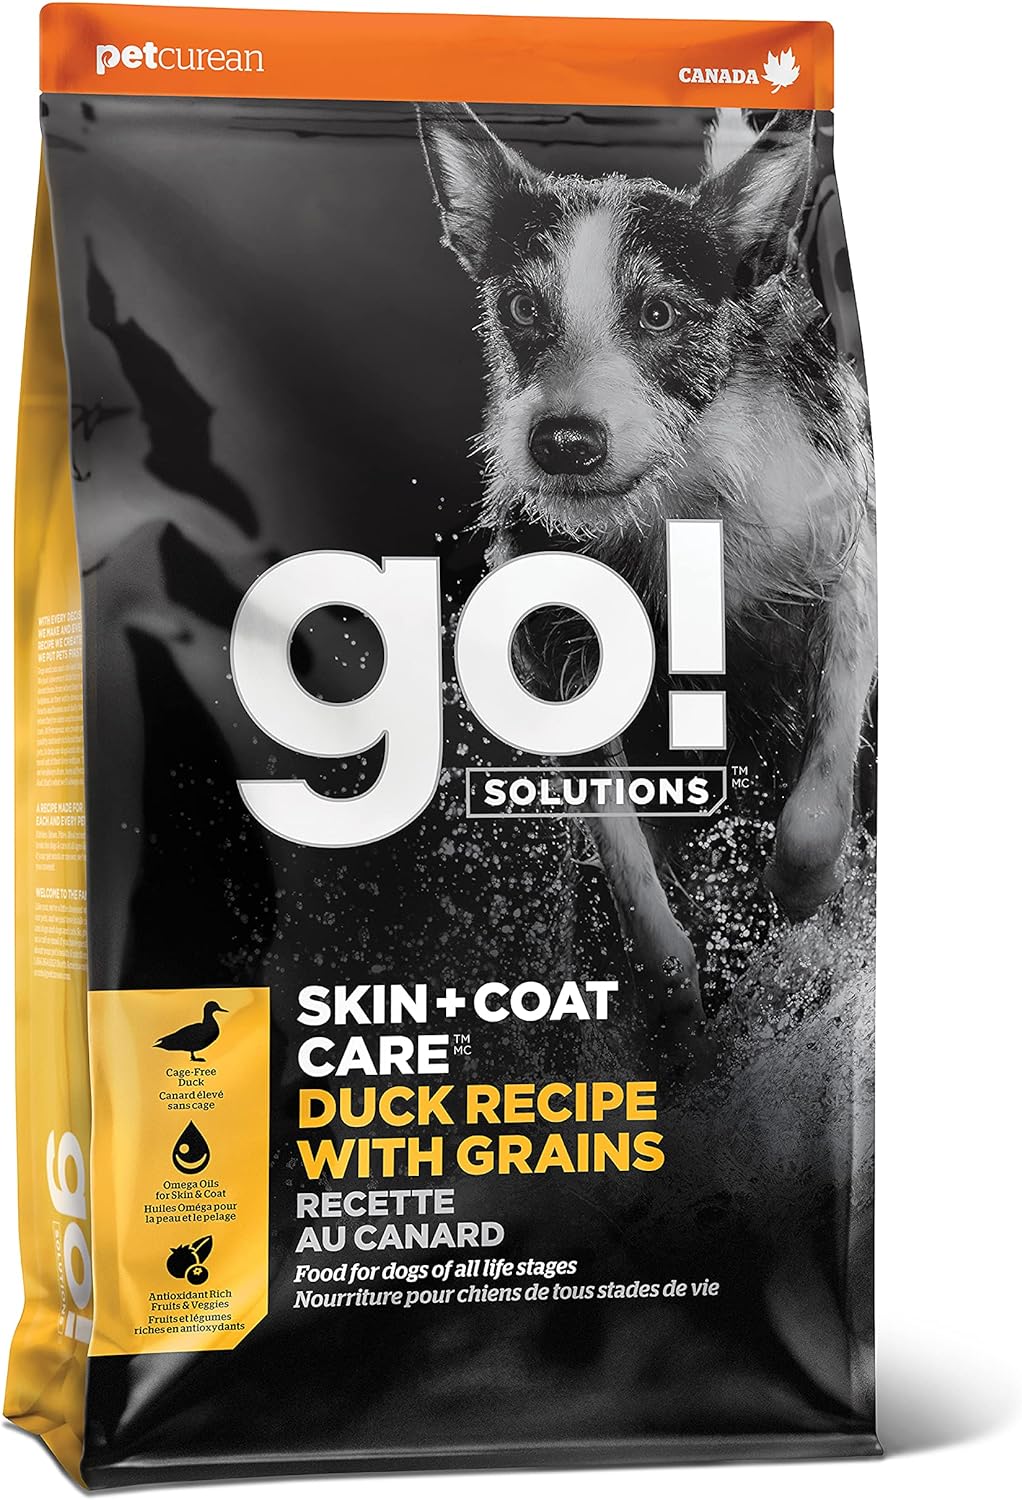 Go! Solutions Skin + Coat Care Duck Recipe with Grains Dry Dog Food – Gallery Image 1